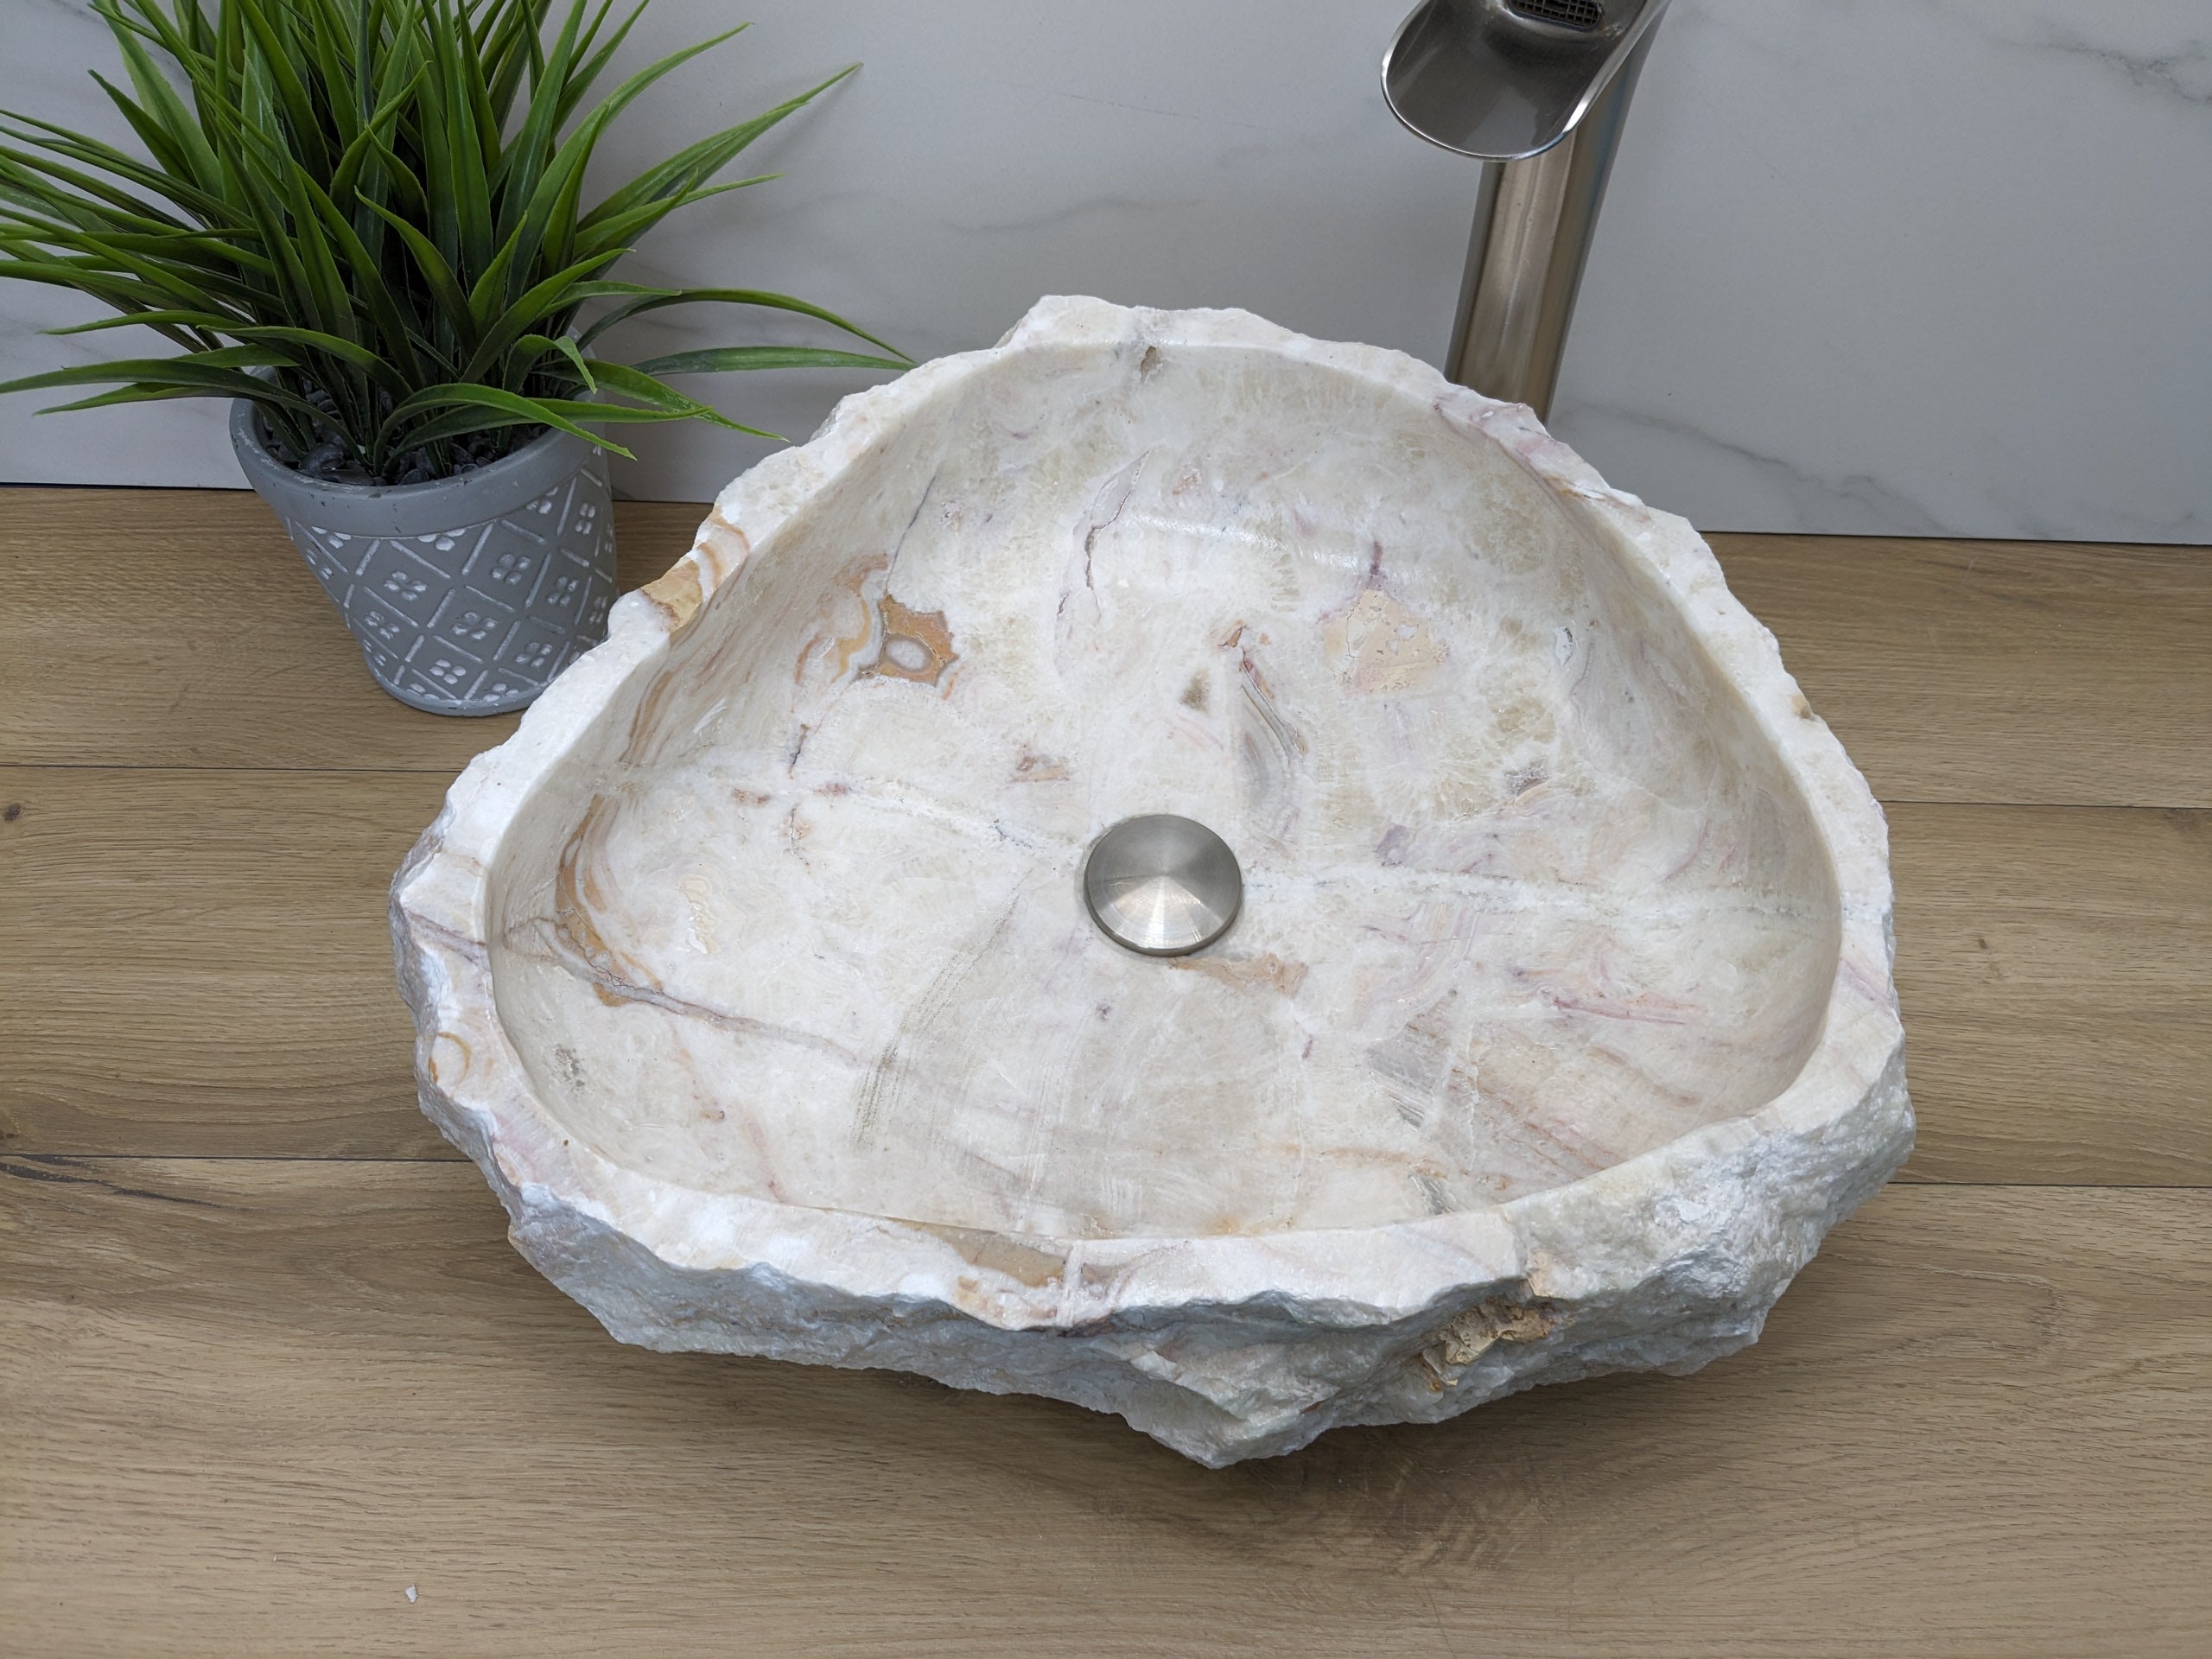 White and Cream Onyx Rustic Bathroom Vessel Sink. A beautiful work of art. We offer fast shipping. Handmade in Mexico. We hand finish, package, and ship from the USA. Buy now at www.felipeandgrace.com. 